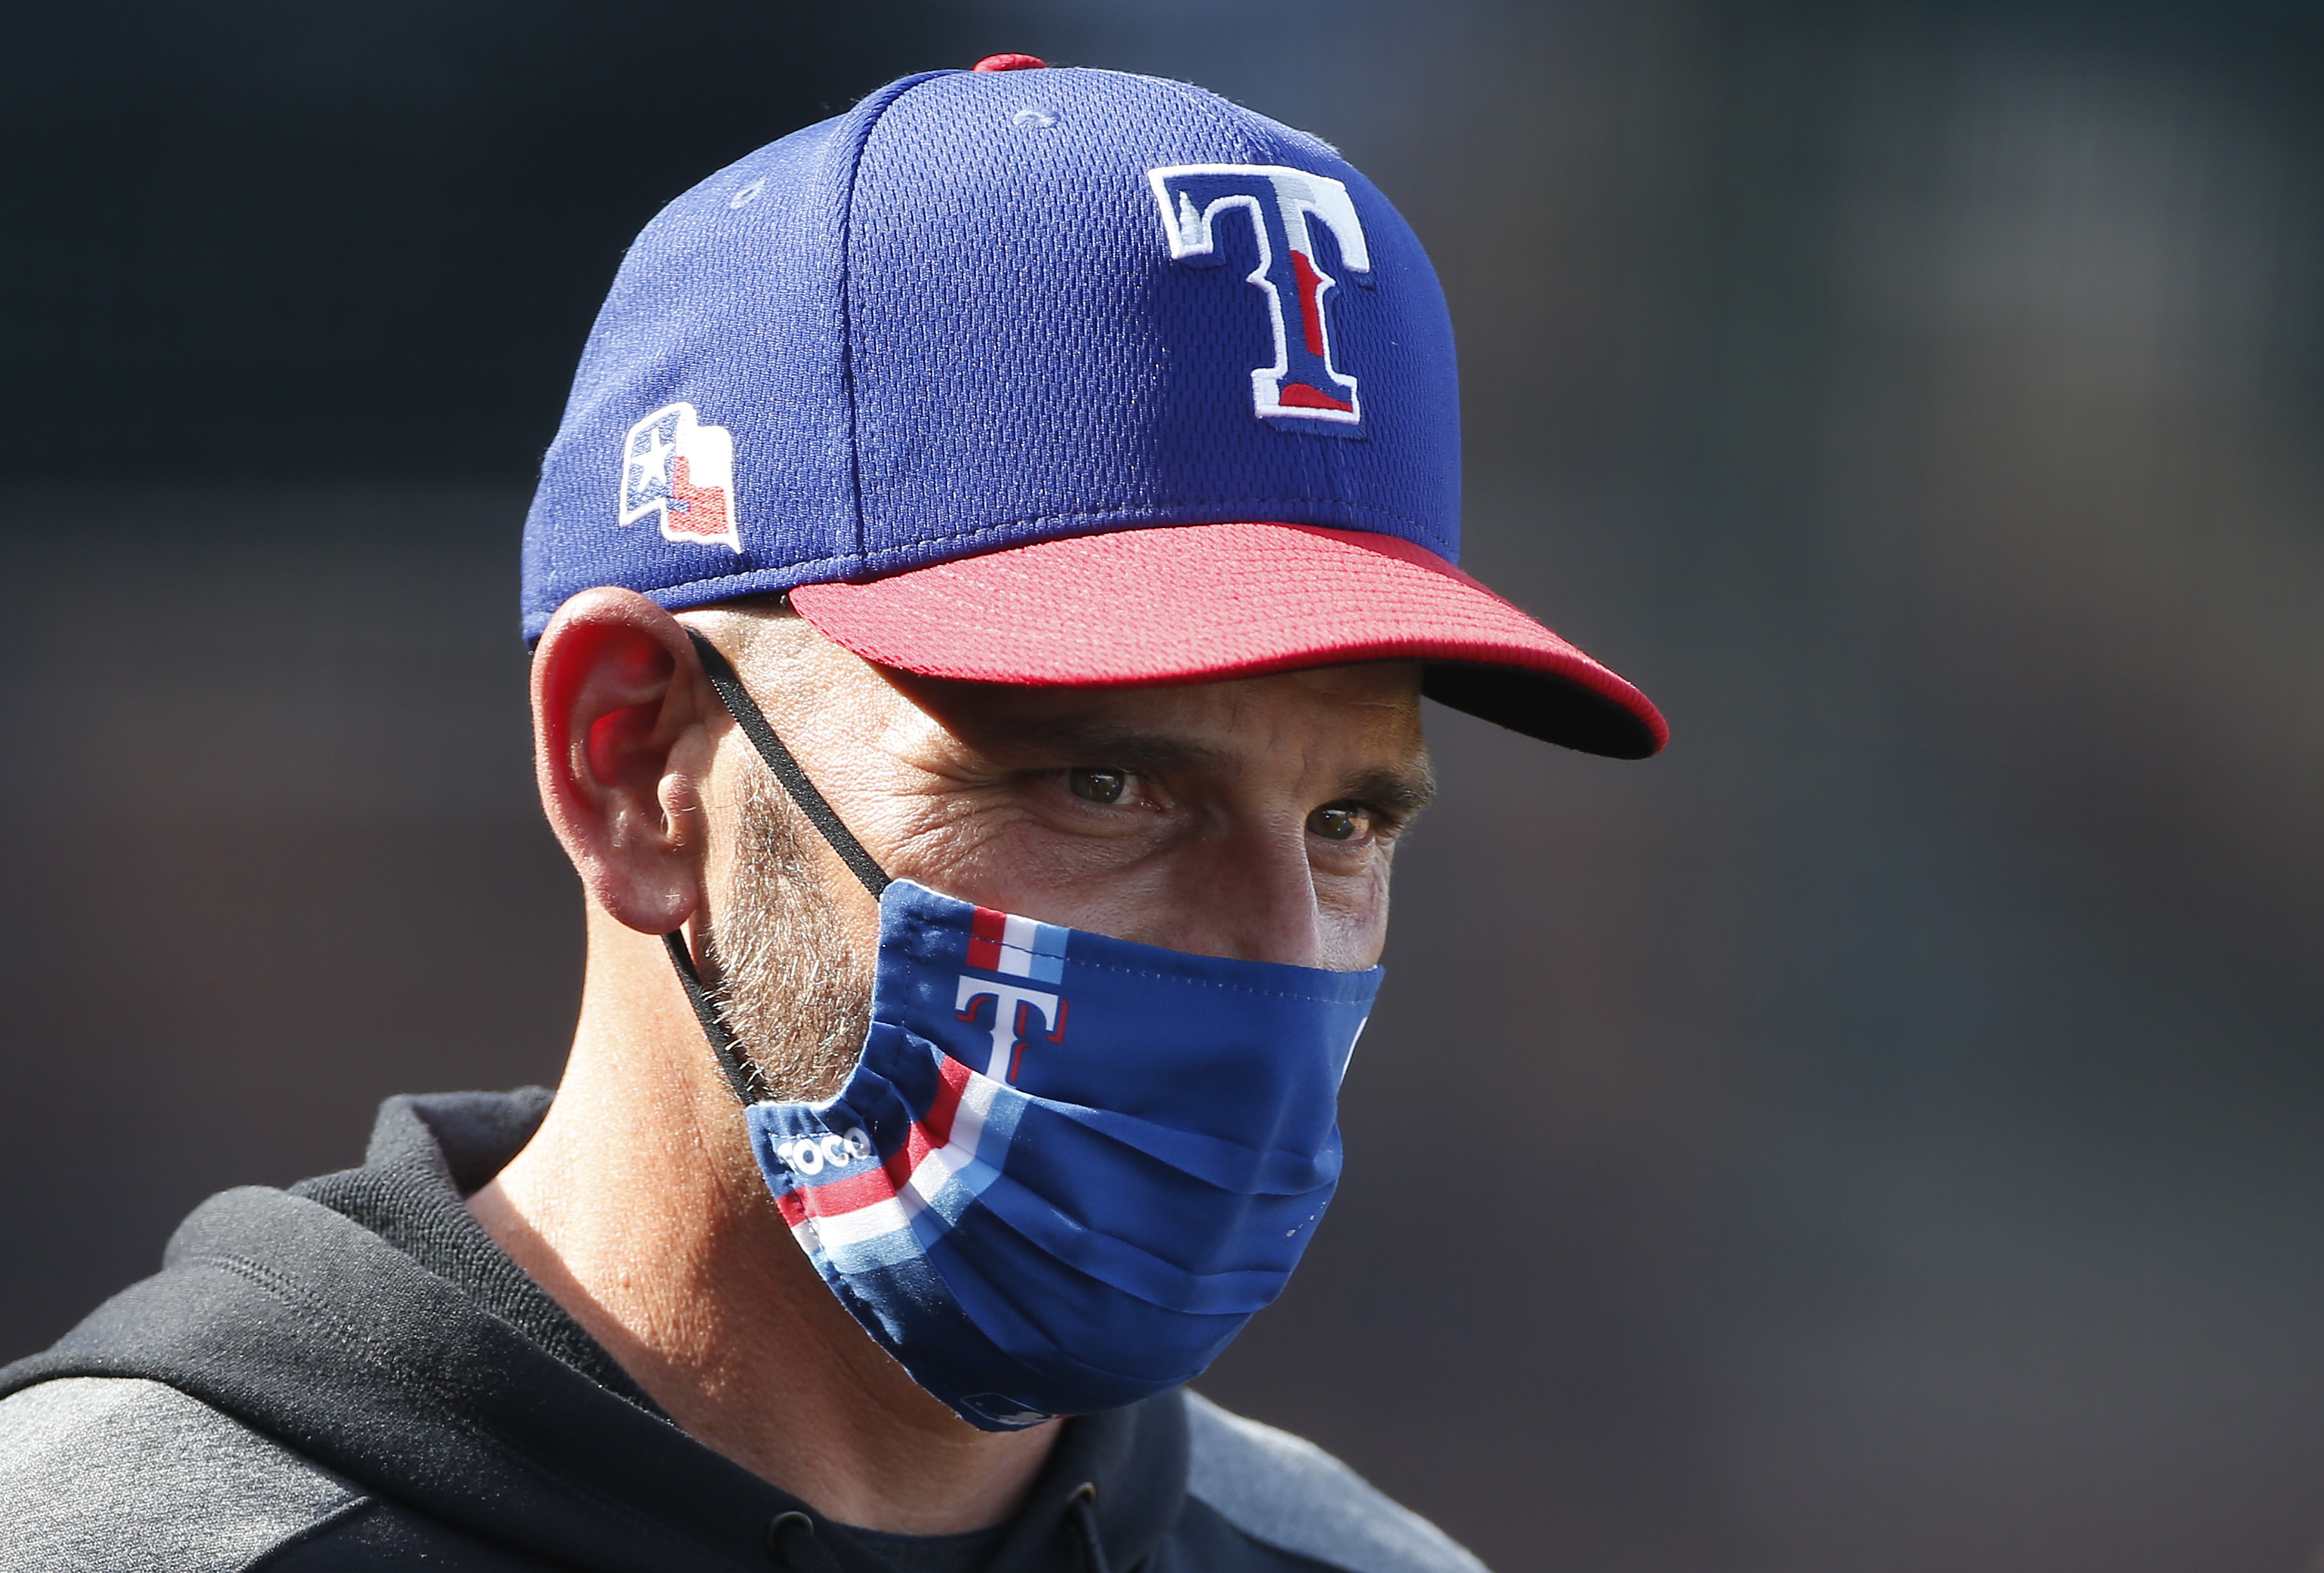 New Air-Conditioned Stadium May Be Best Thing to Distract Rangers